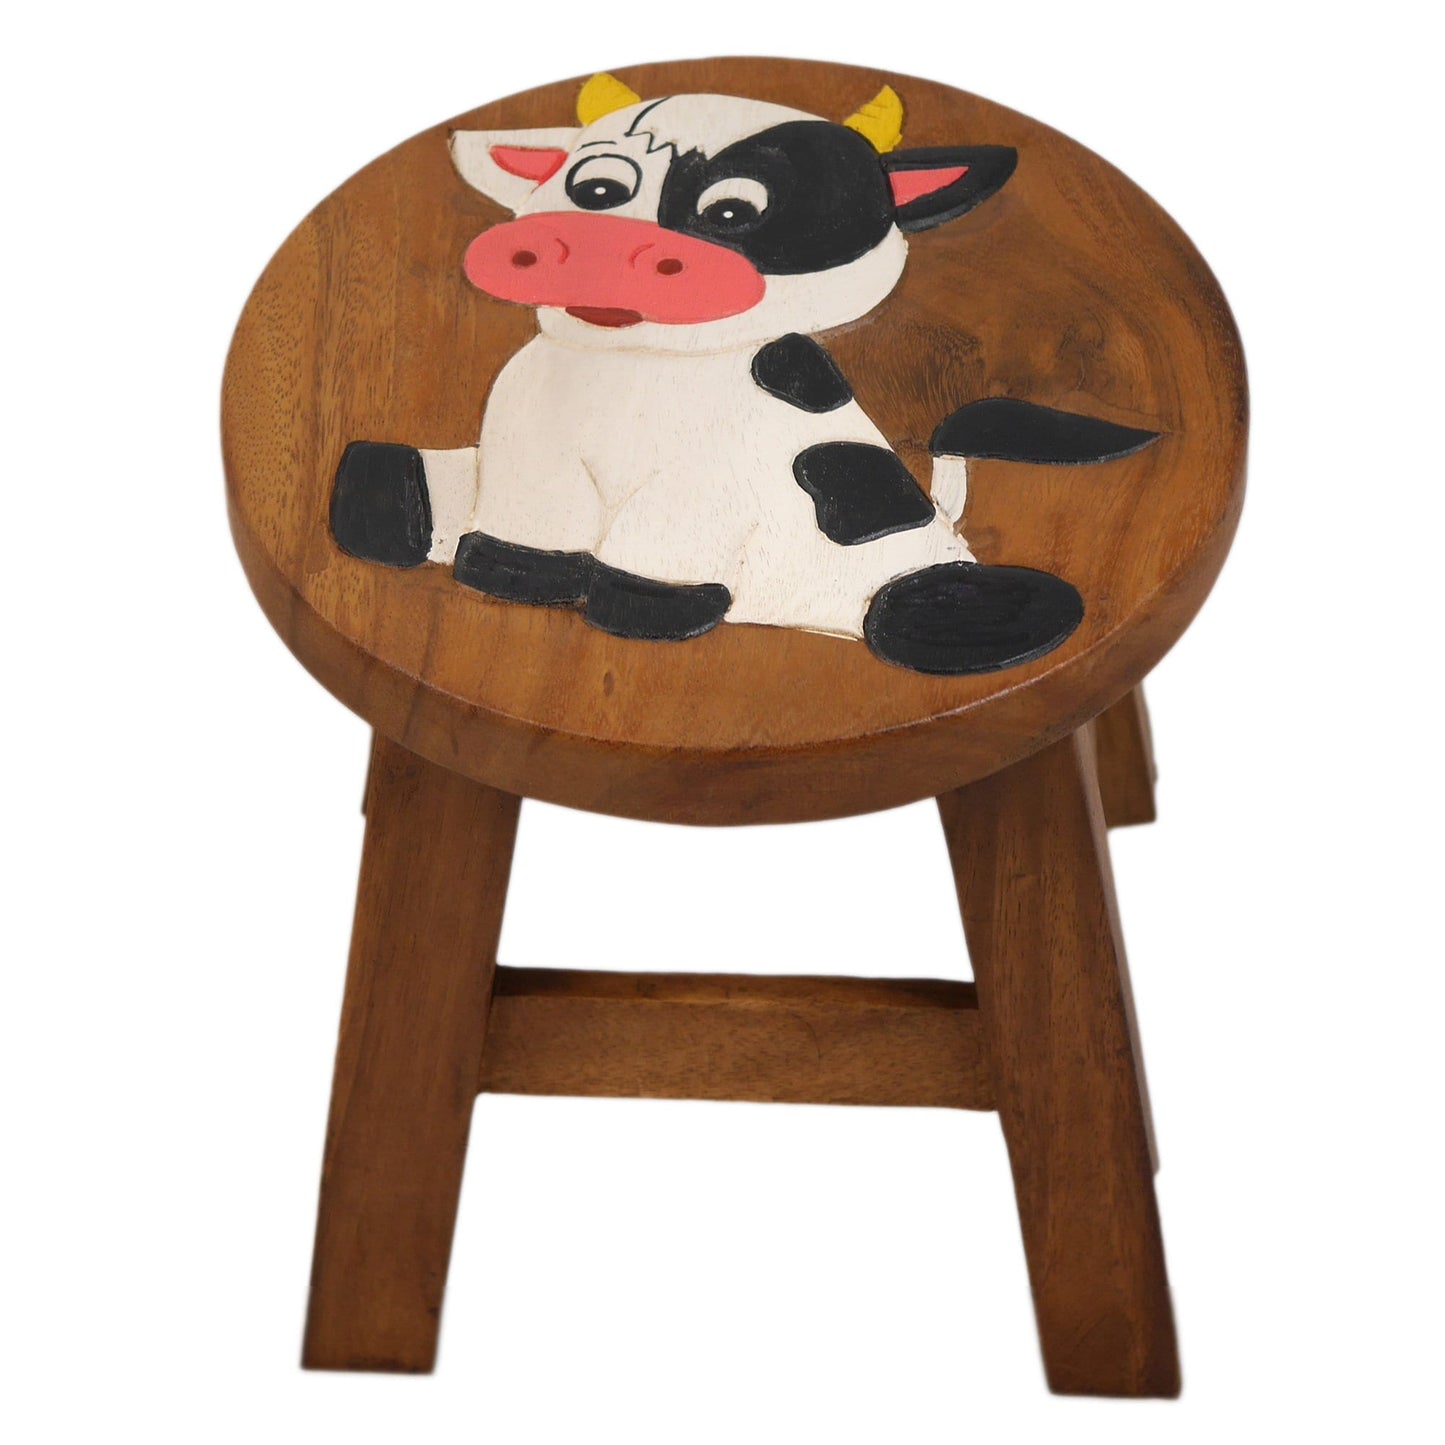 Children's stool wooden stool with animal motif colorful cow painted and carved height 25 cm